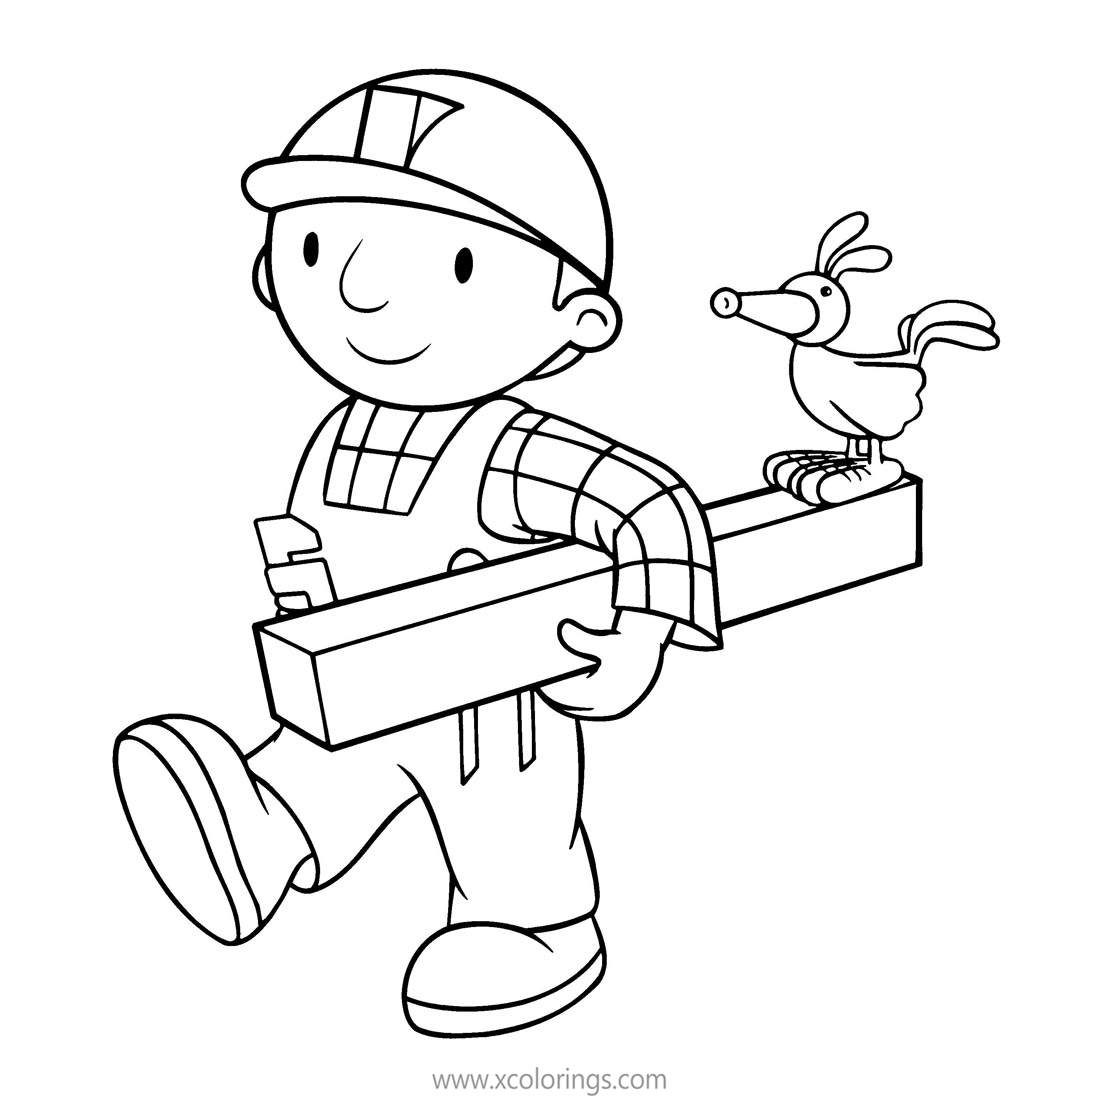 Free Bob The Builder Coloring Pages Bob Brings a Wood printable